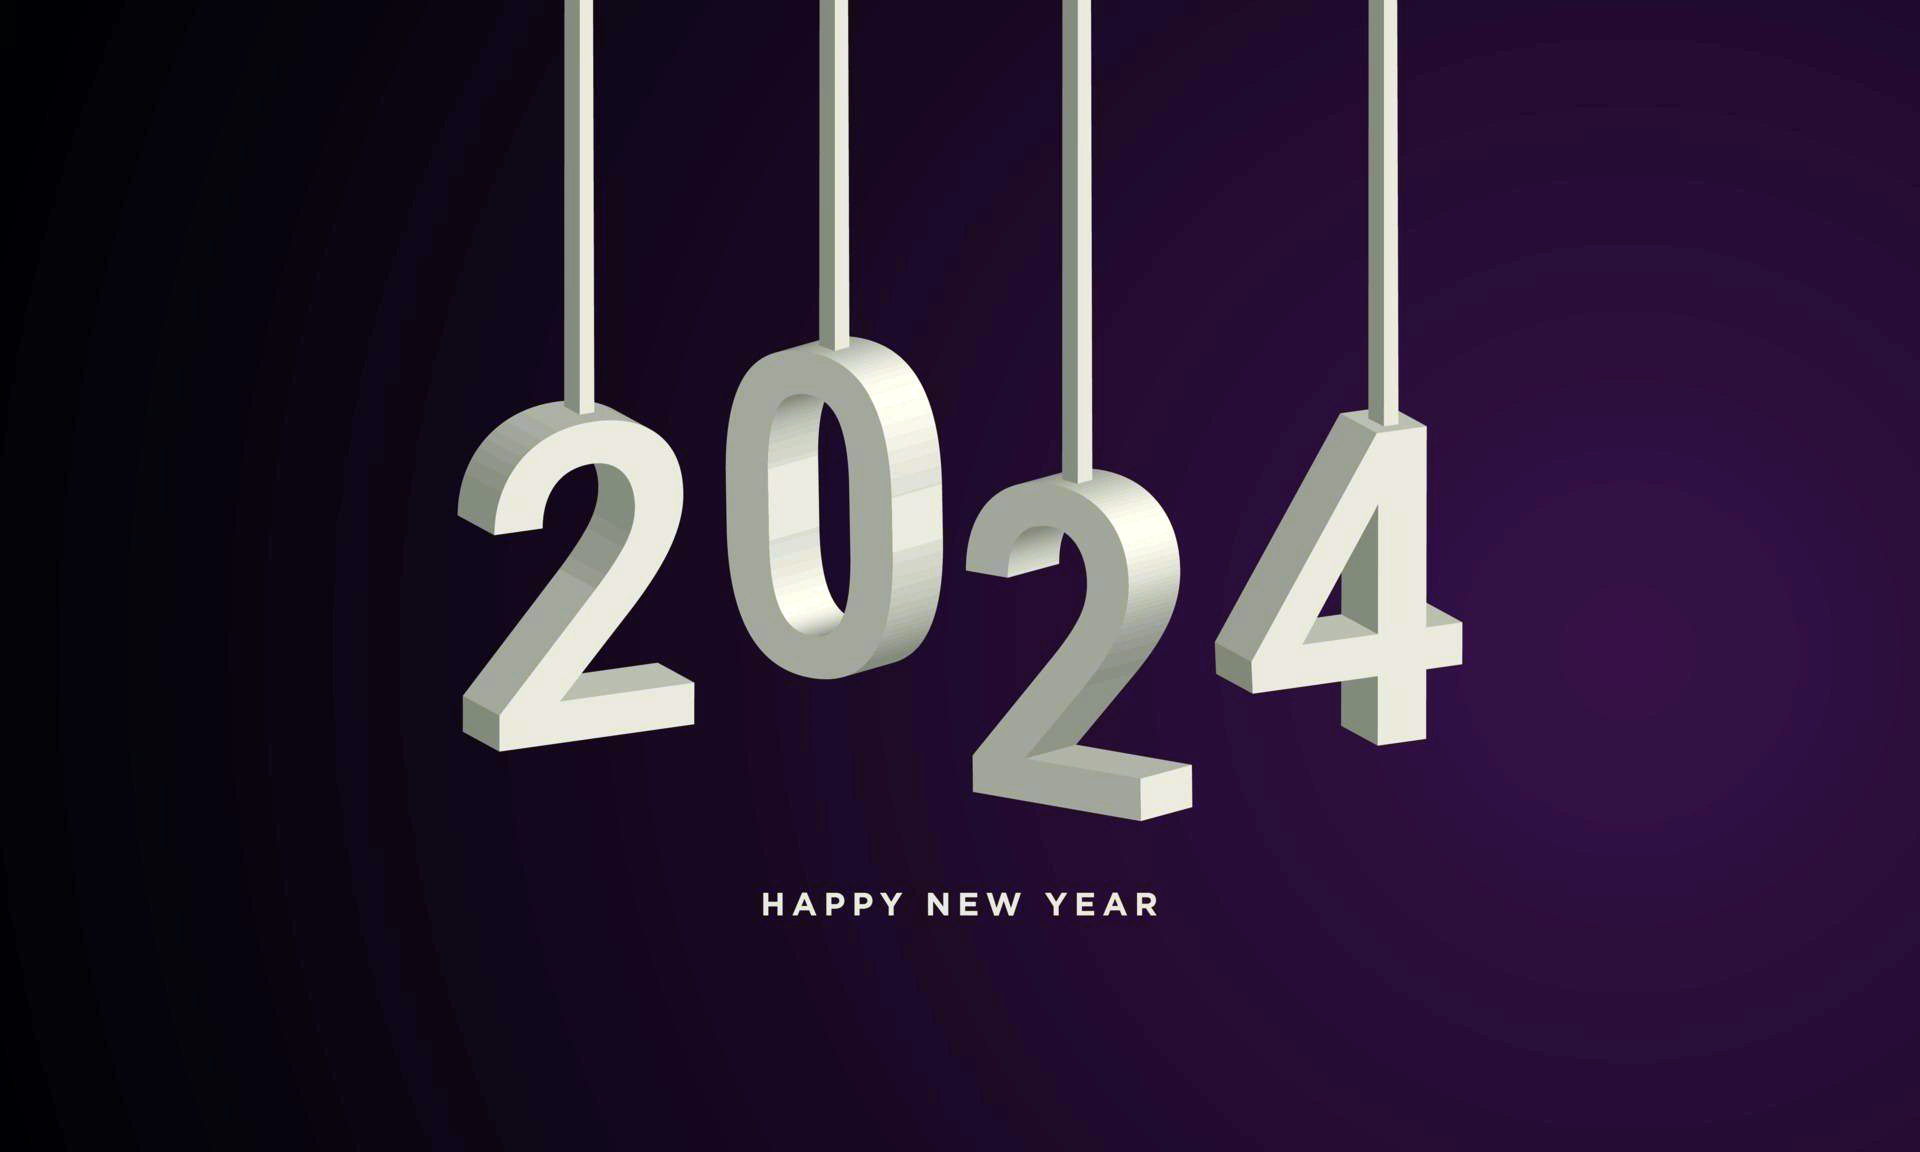 happy new year 2024 hanging golden 3d numbers with ribbons modern happy new year background